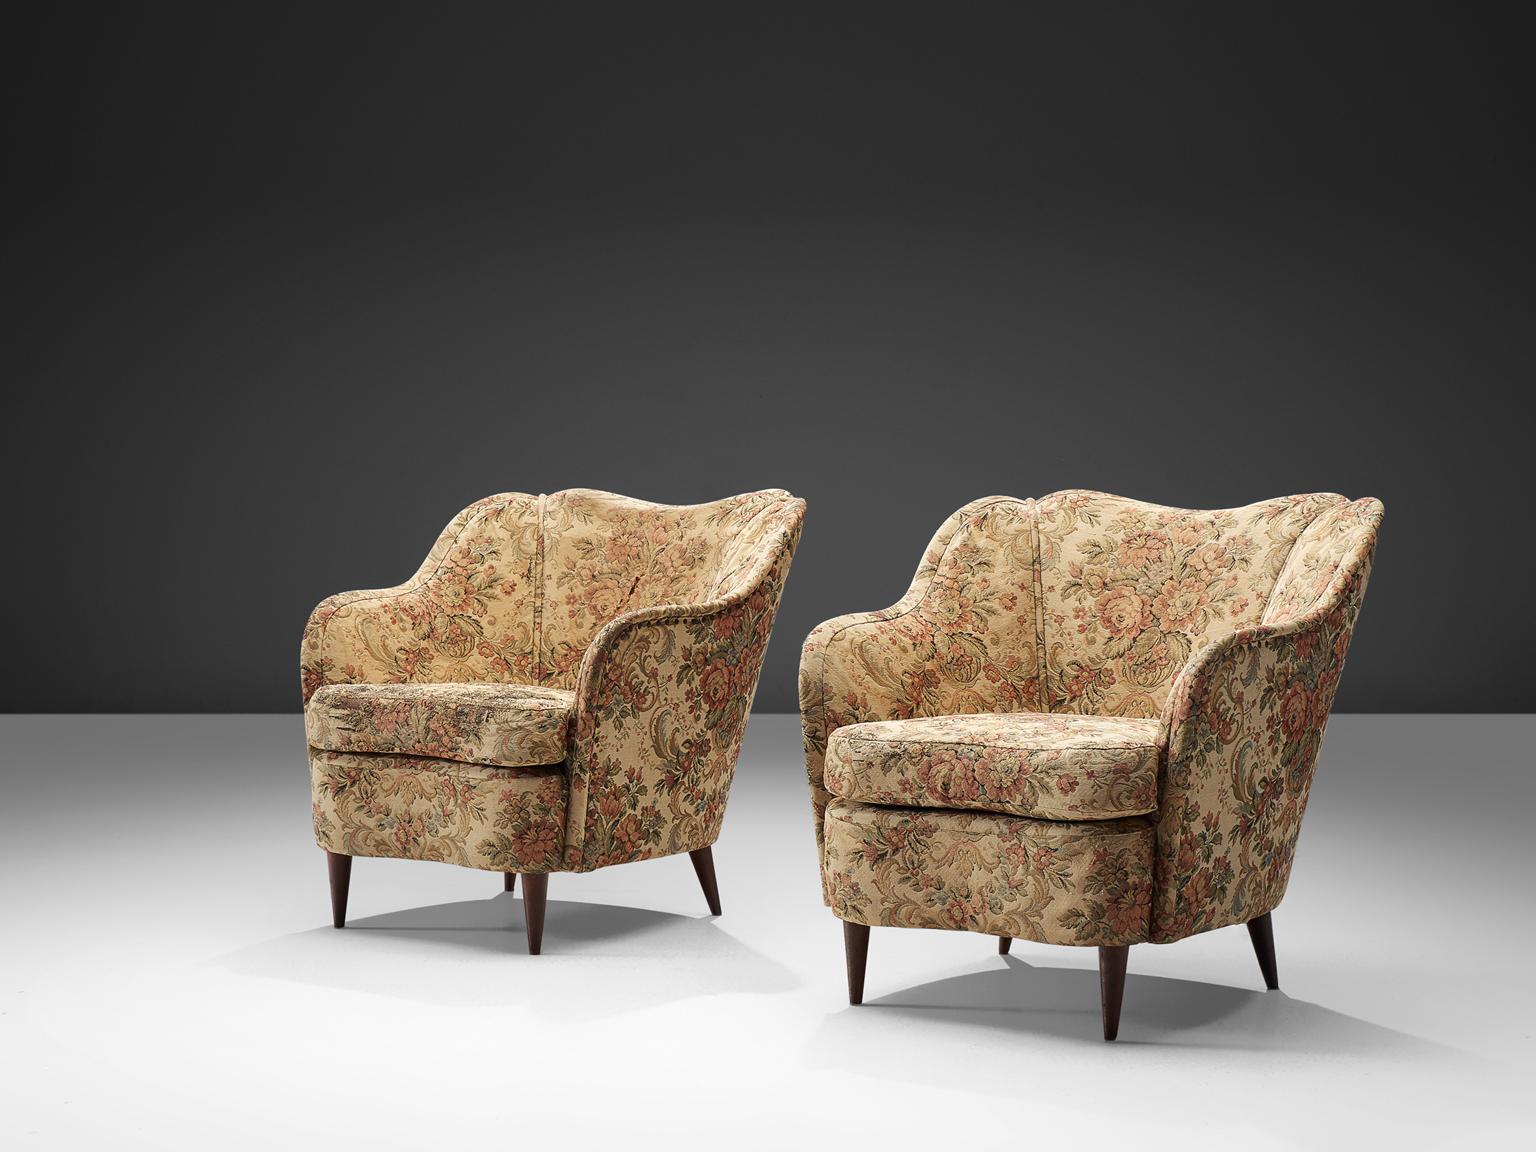 In the style of Gio Ponti, set of two lounge chairs, wood and floral fabric, Italy, 1940s.

Elegant and feminine easy chairs designed in the style of Gio Ponti with original upholstery. This chairs feature curved backrests. The tapered wooden legs